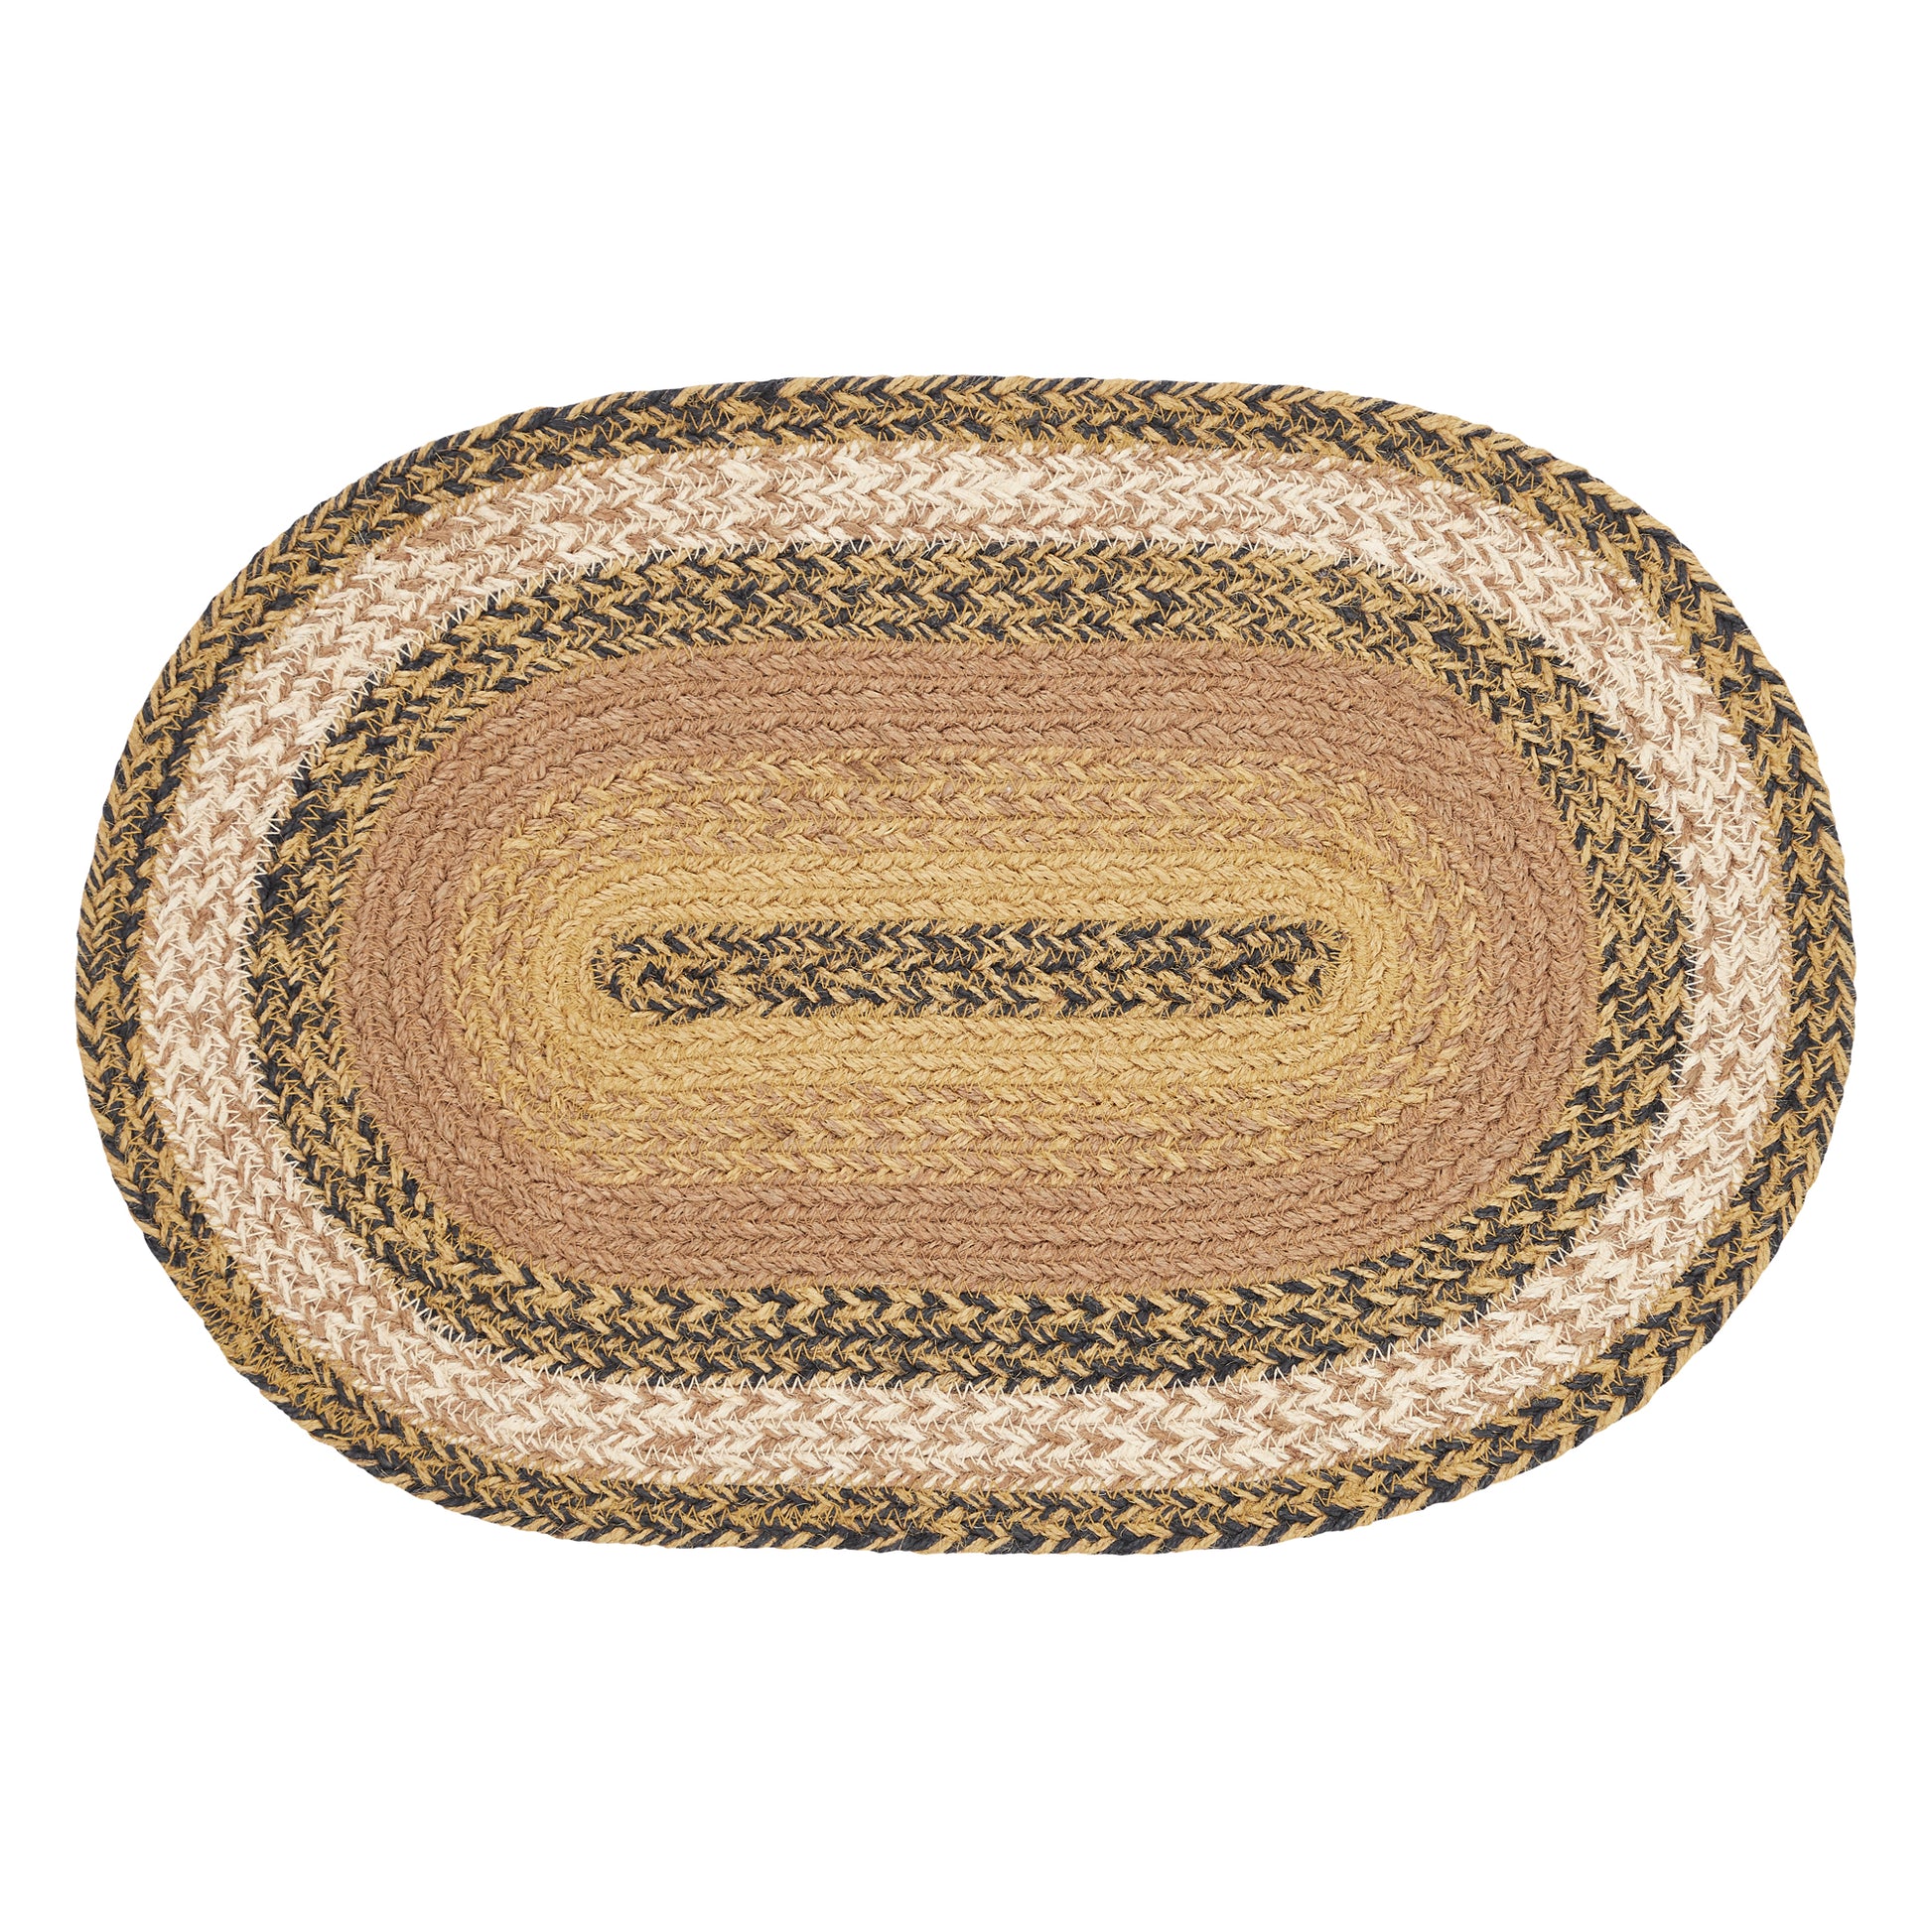 81387-Kettle-Grove-Jute-Oval-Placemat-12x18-image-4